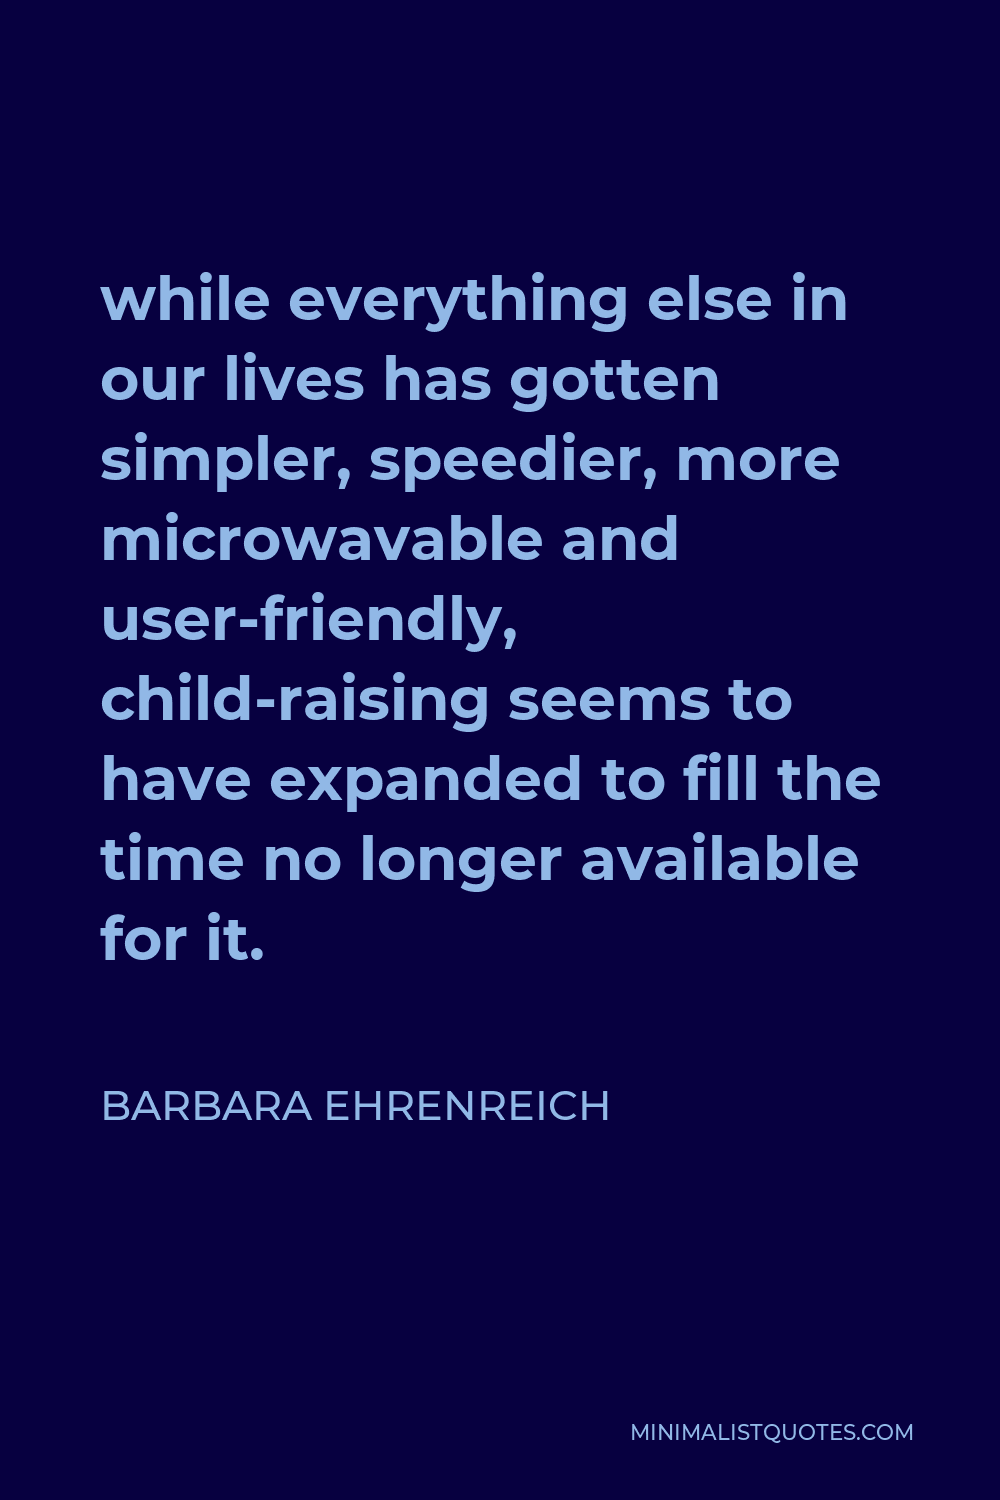 Barbara Ehrenreich Quote - while everything else in our lives has gotten simpler, speedier, more microwavable and user-friendly, child-raising seems to have expanded to fill the time no longer available for it.